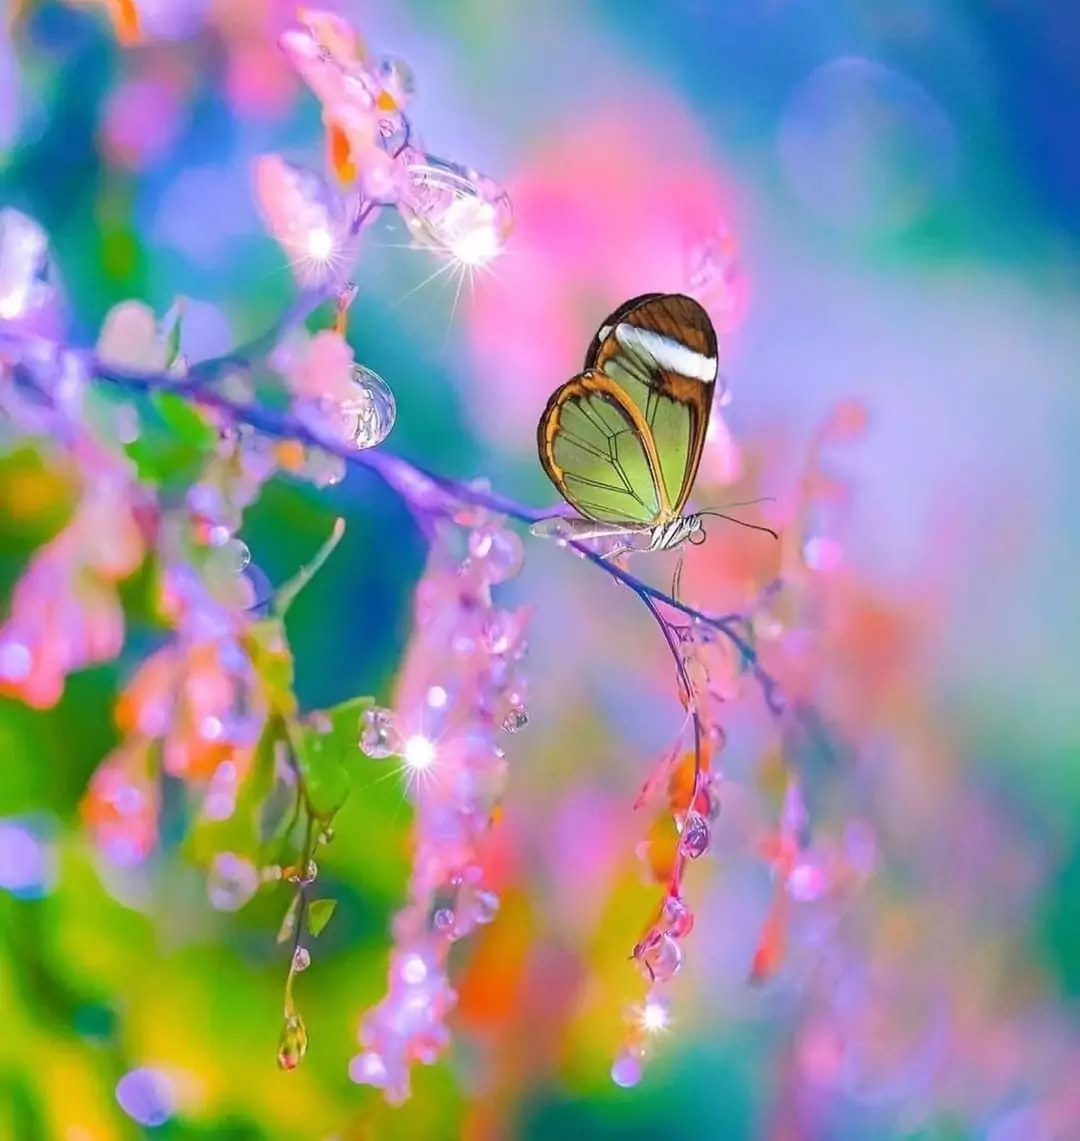 beautiful butterfly Images • khushi (@2426287587a) on ShareChat